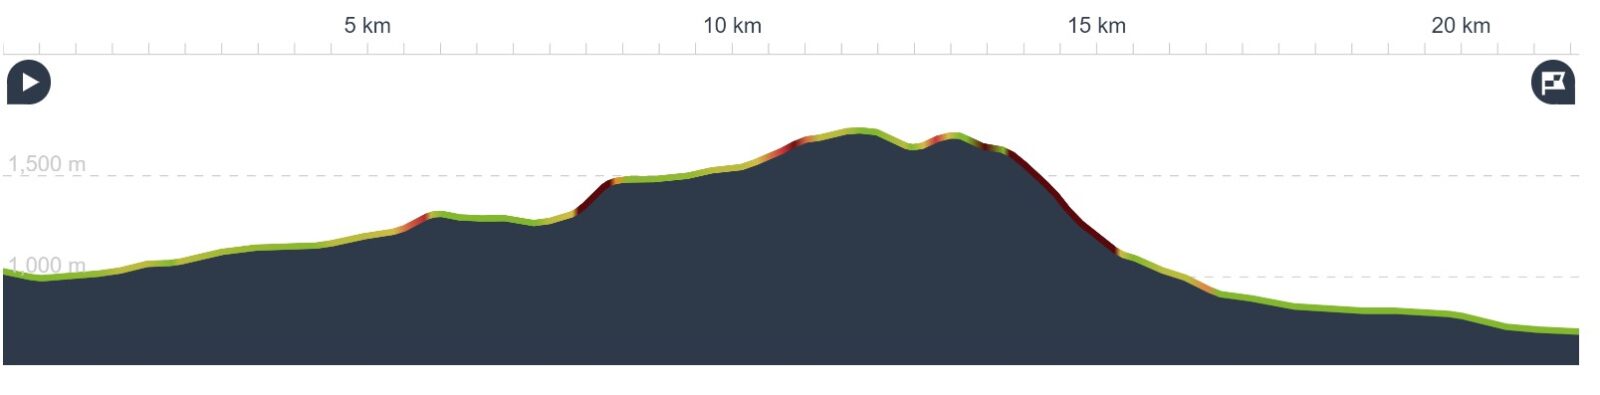 Elevation map showing the extreme downhill we had to negotiate at the end of the day.